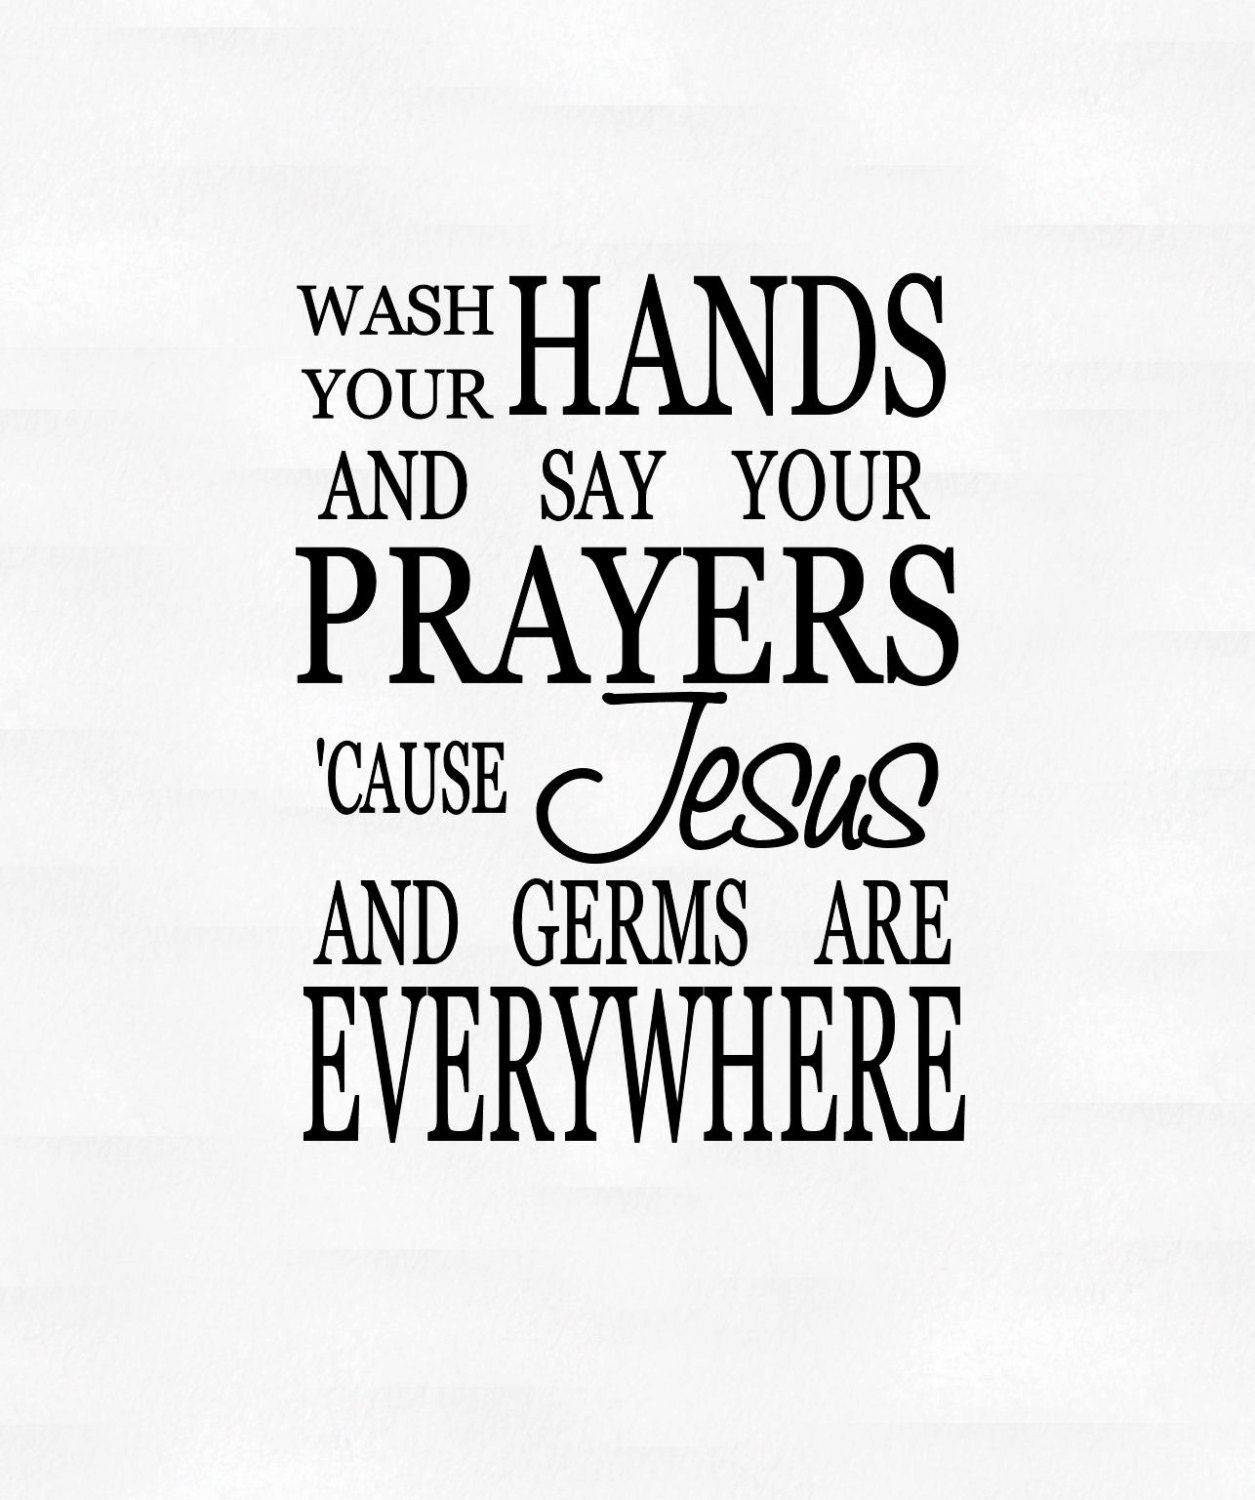 Wash Your Hands And Say Your Prayers Vinyl Wall Decal | Etsy - Wash Your Hands And Say Your Prayers Free Printable